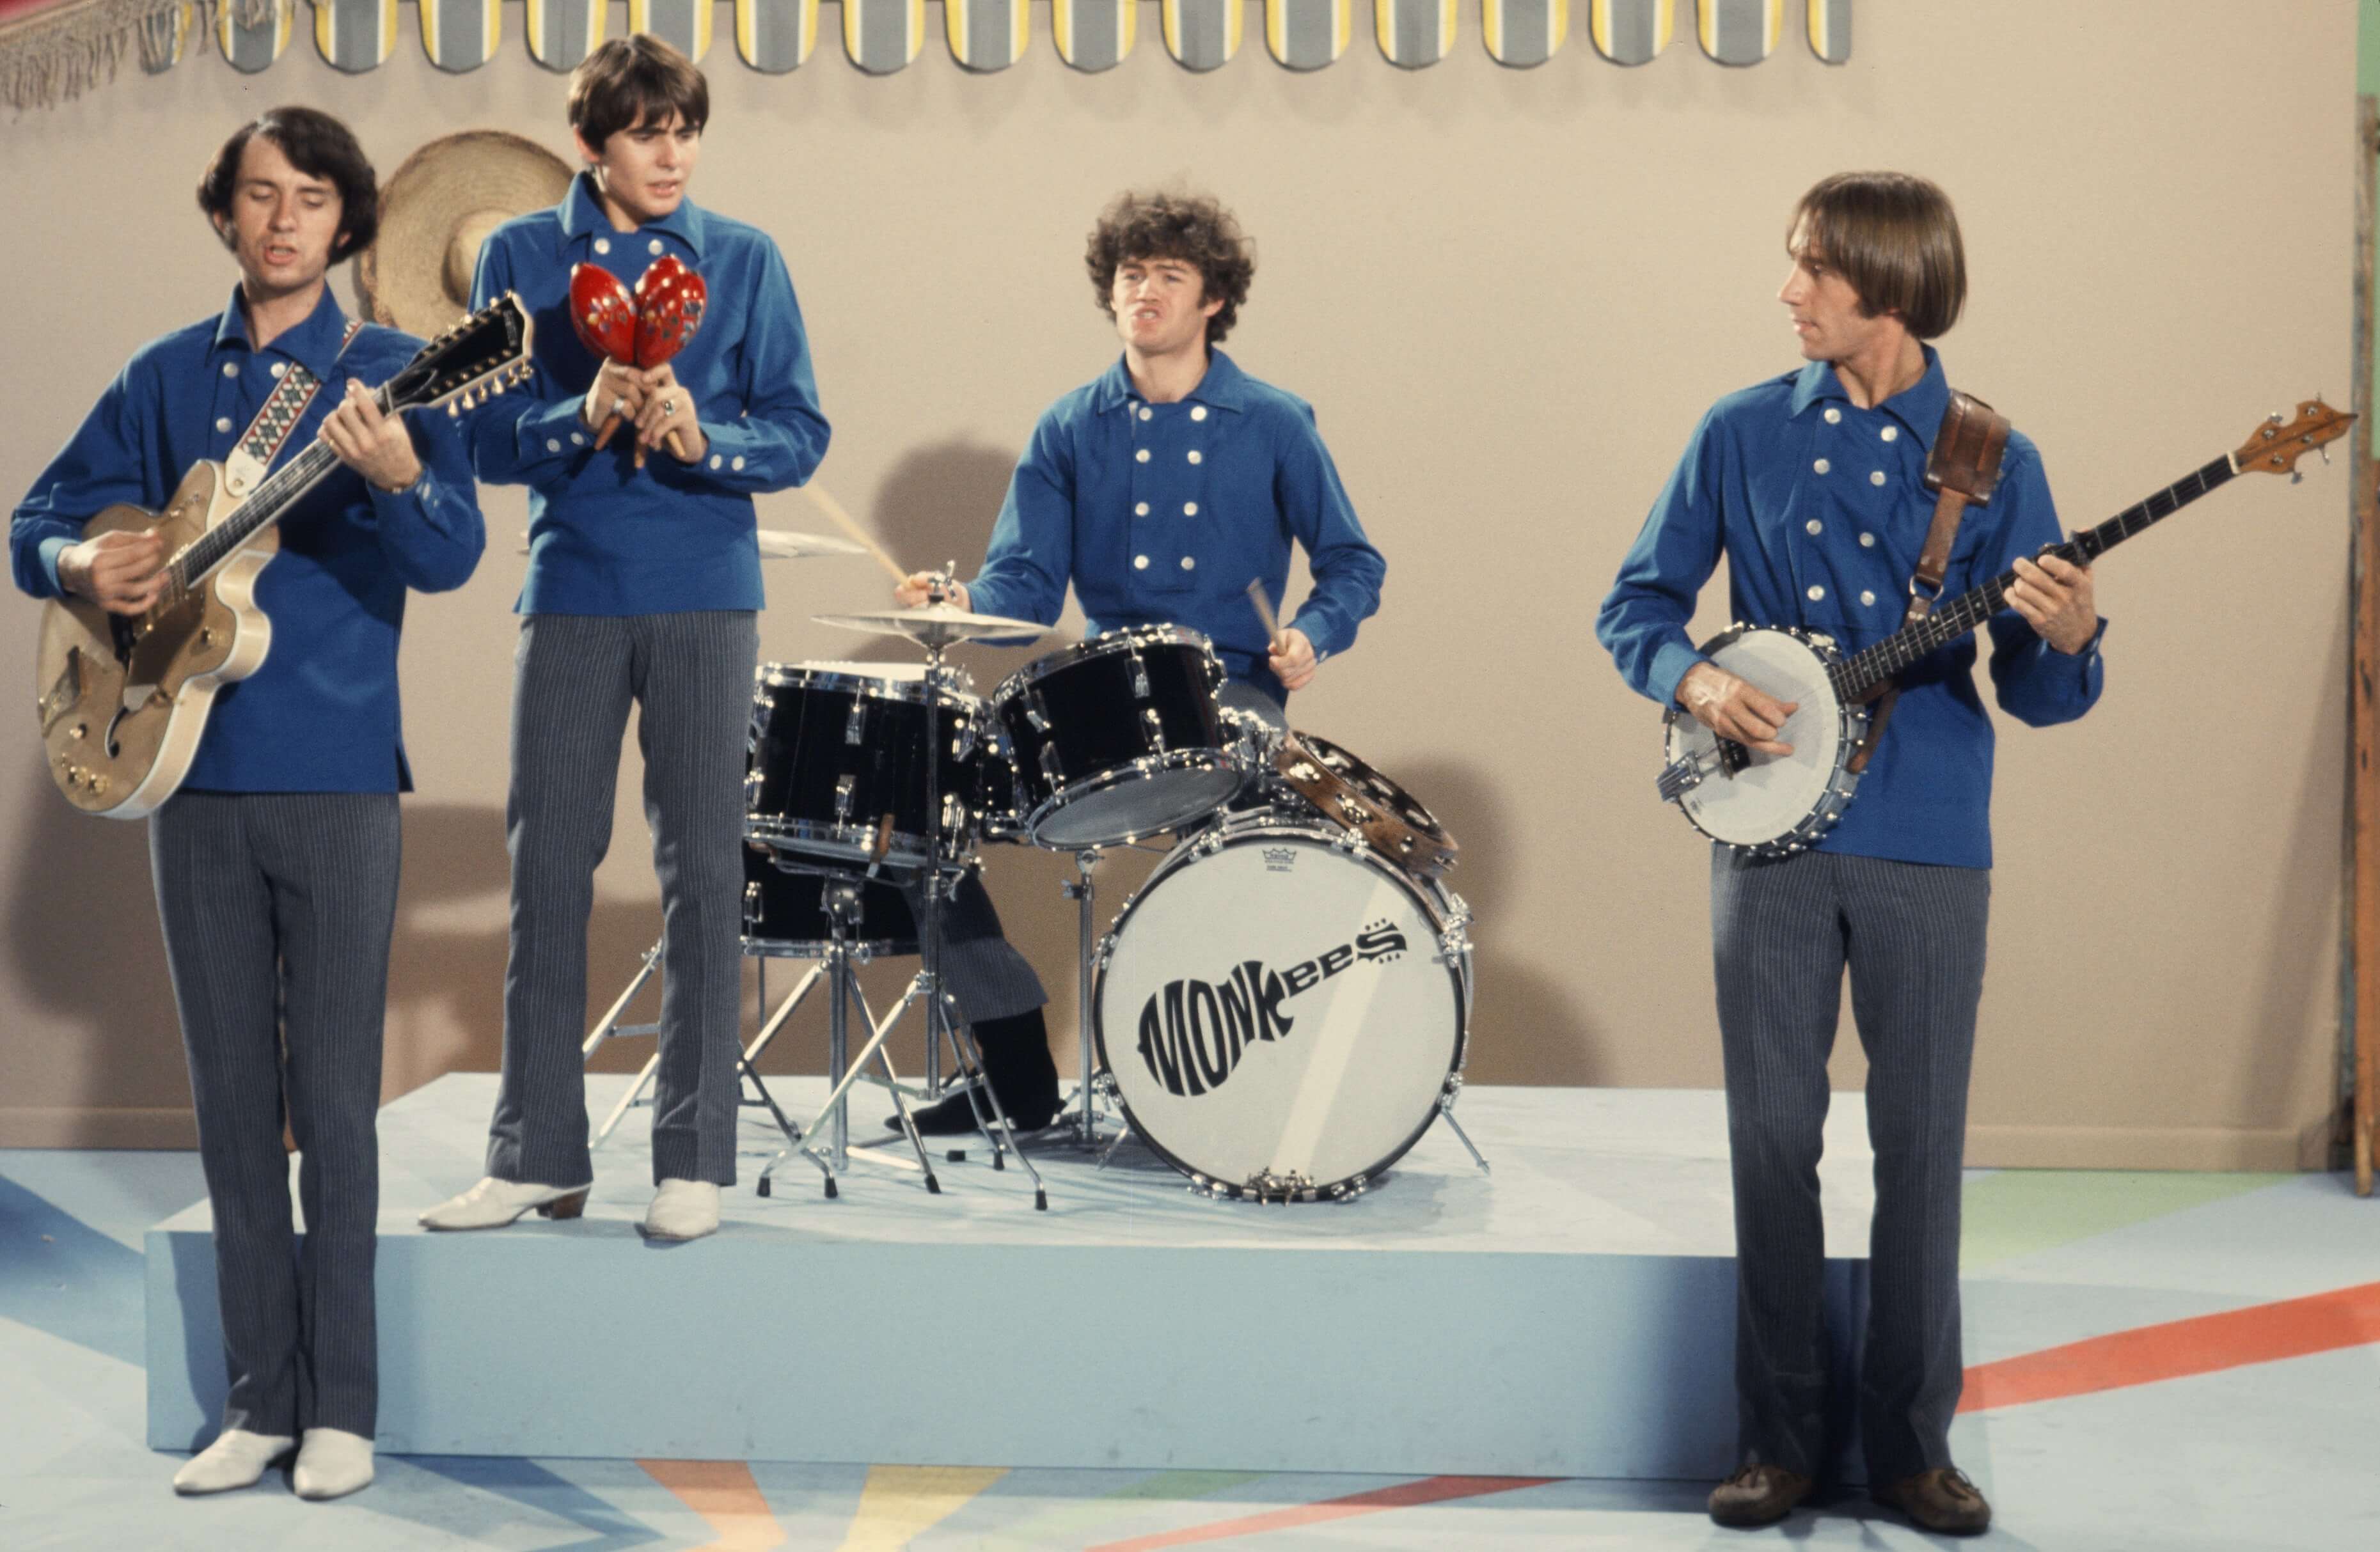 The Monkees wearing blue